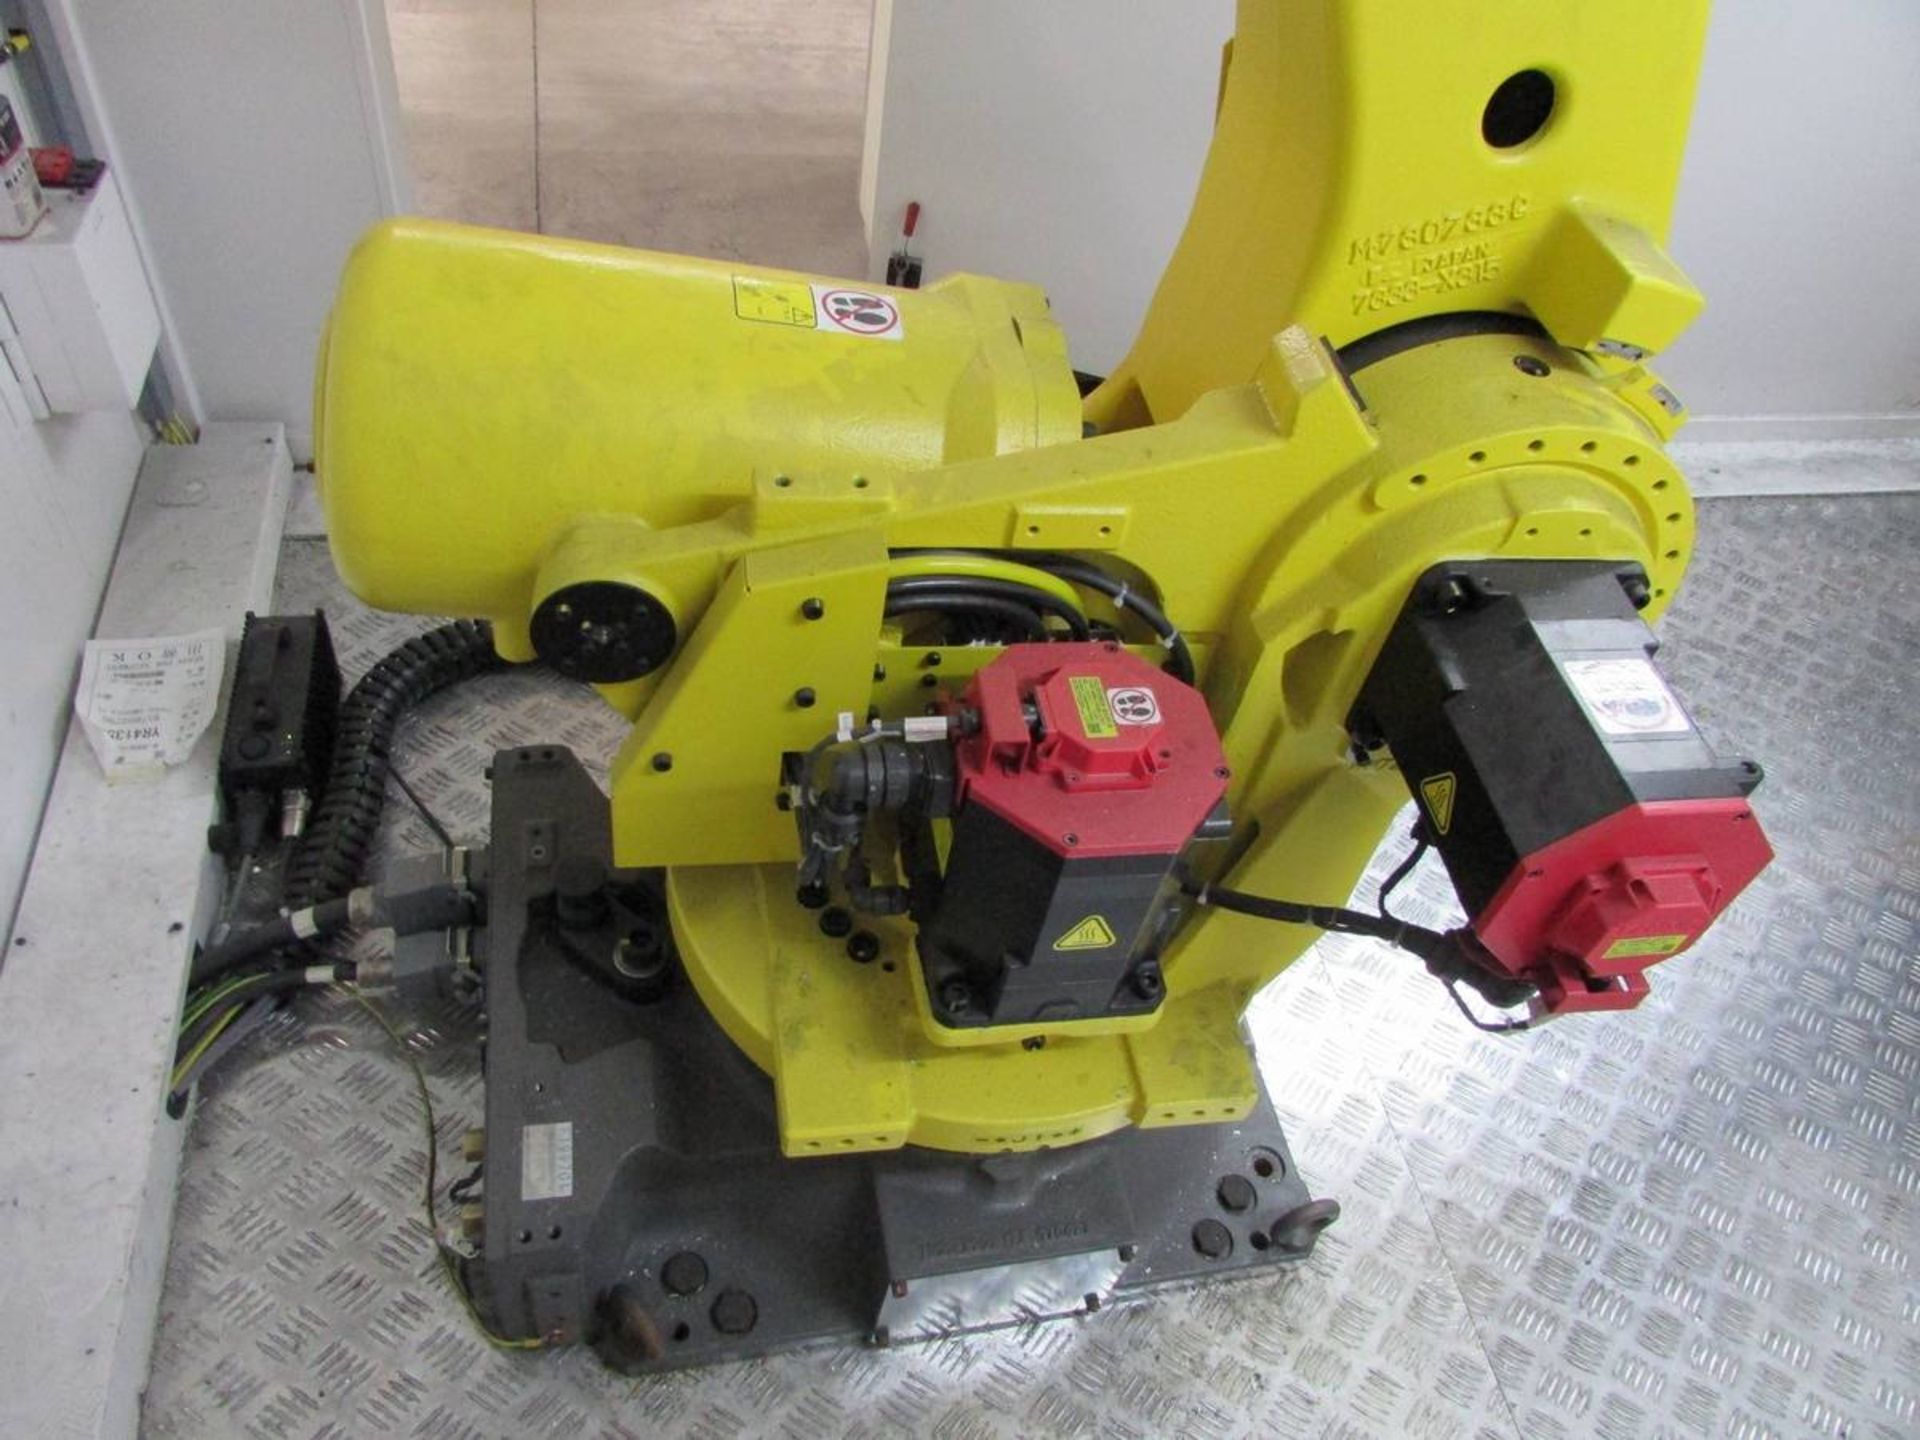 2017 FANUC 2000 iC 210F 6 Axis Material Handling Robot - Image 5 of 9